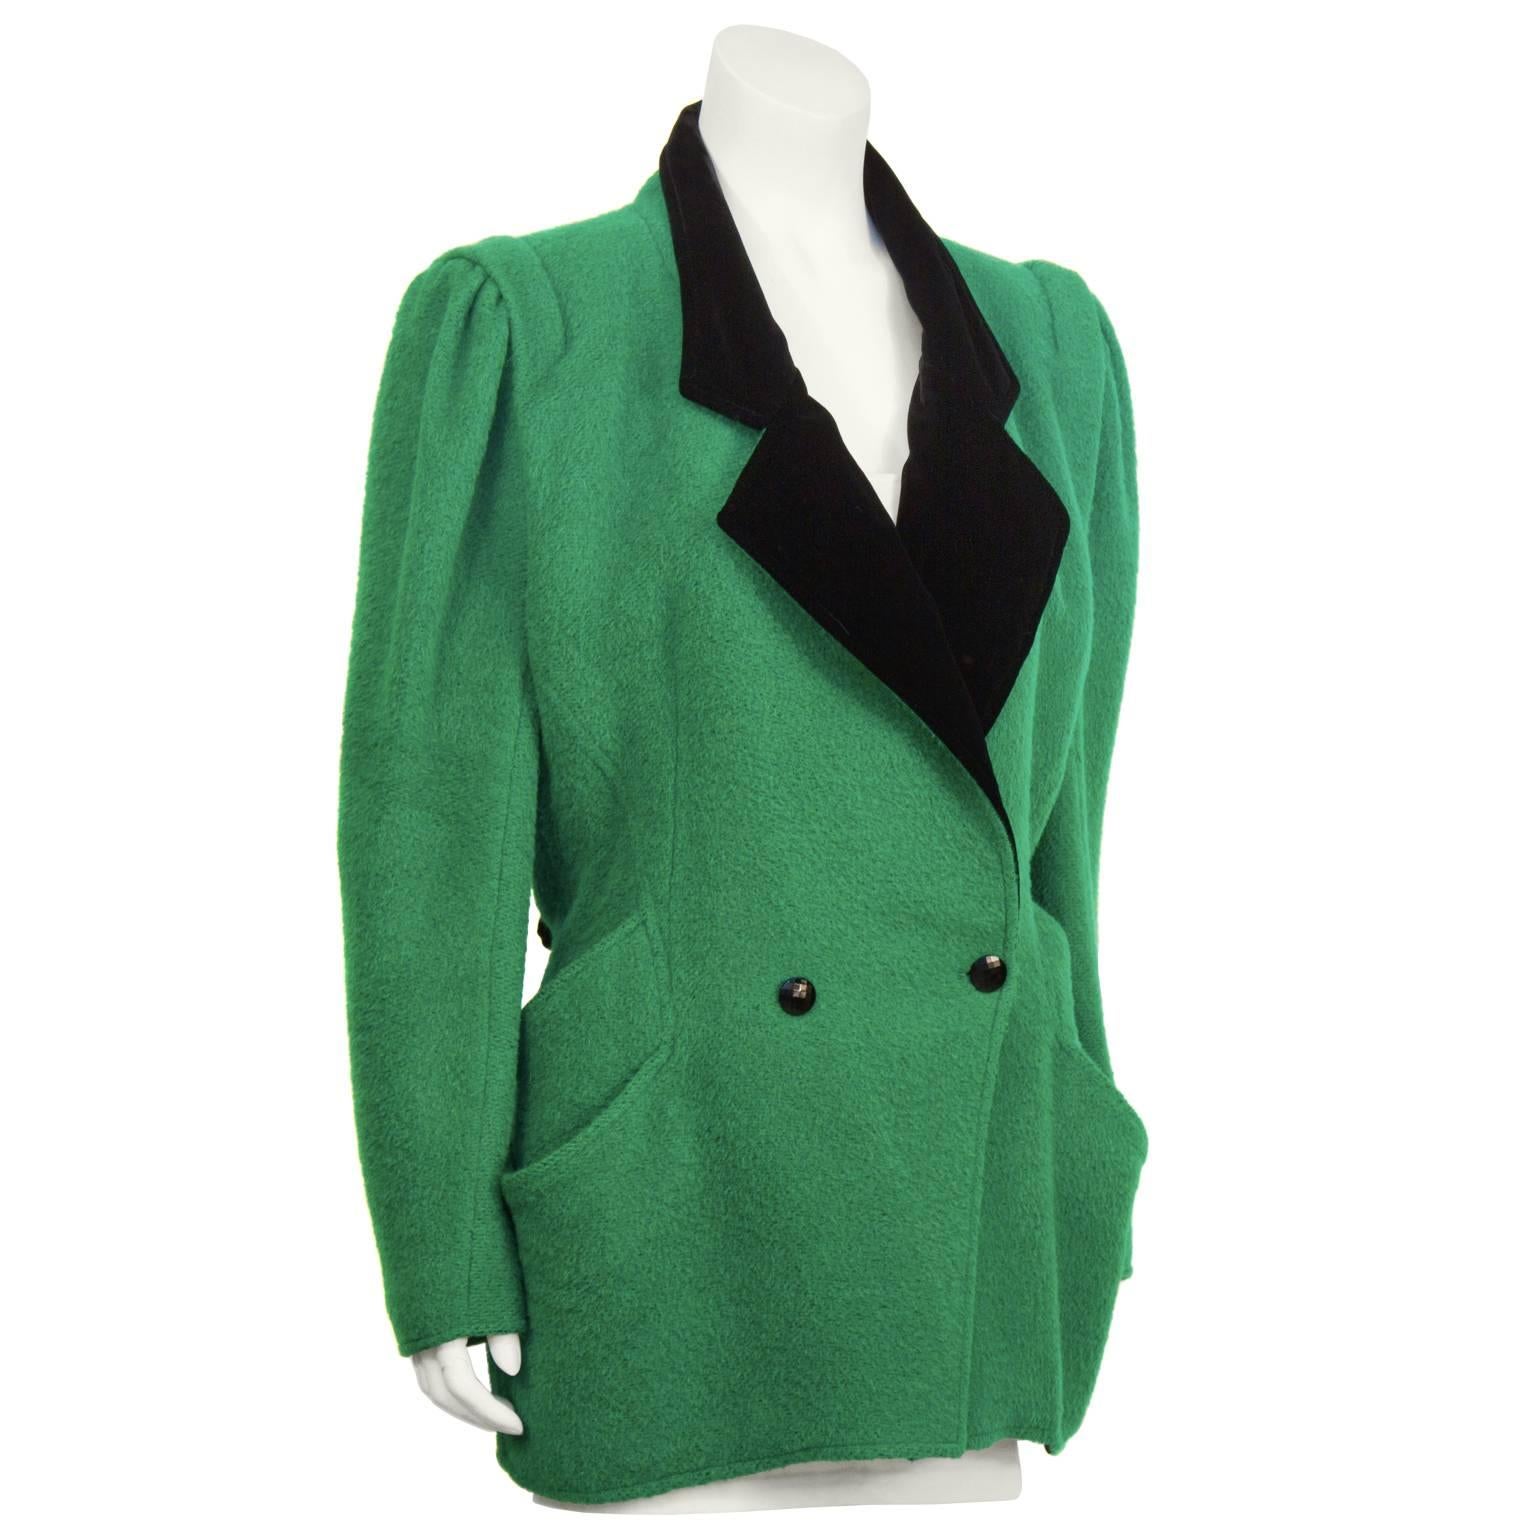 Ungaro 1980's kelly green boiled wool hacking jacket with black velvet collar. The double breasted jacket features an oversized shoulder, fitted waist, with double layered diagonal pockets. Shiny black faceted buttons on the front and at the cuffs